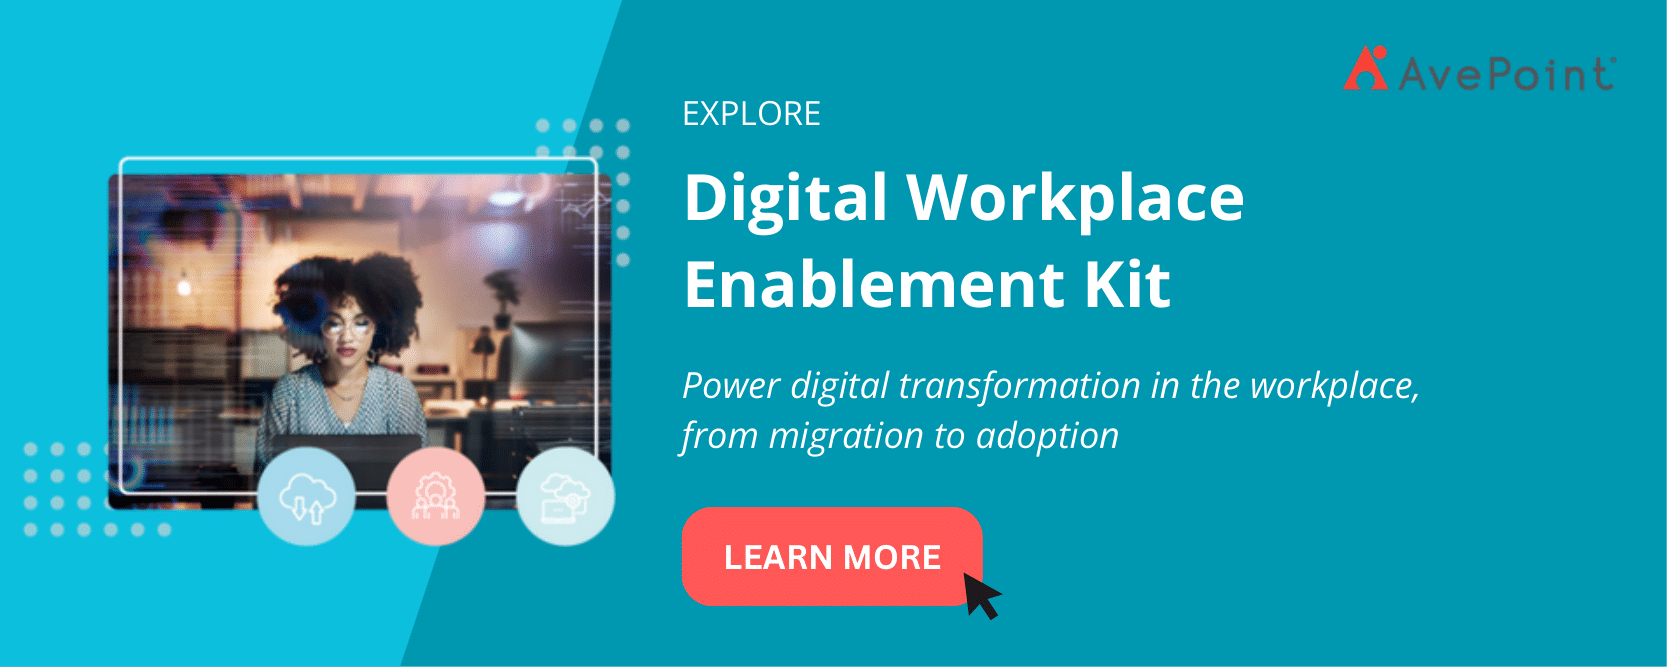 digital-workplace-enablement-kit-learn-more-cta